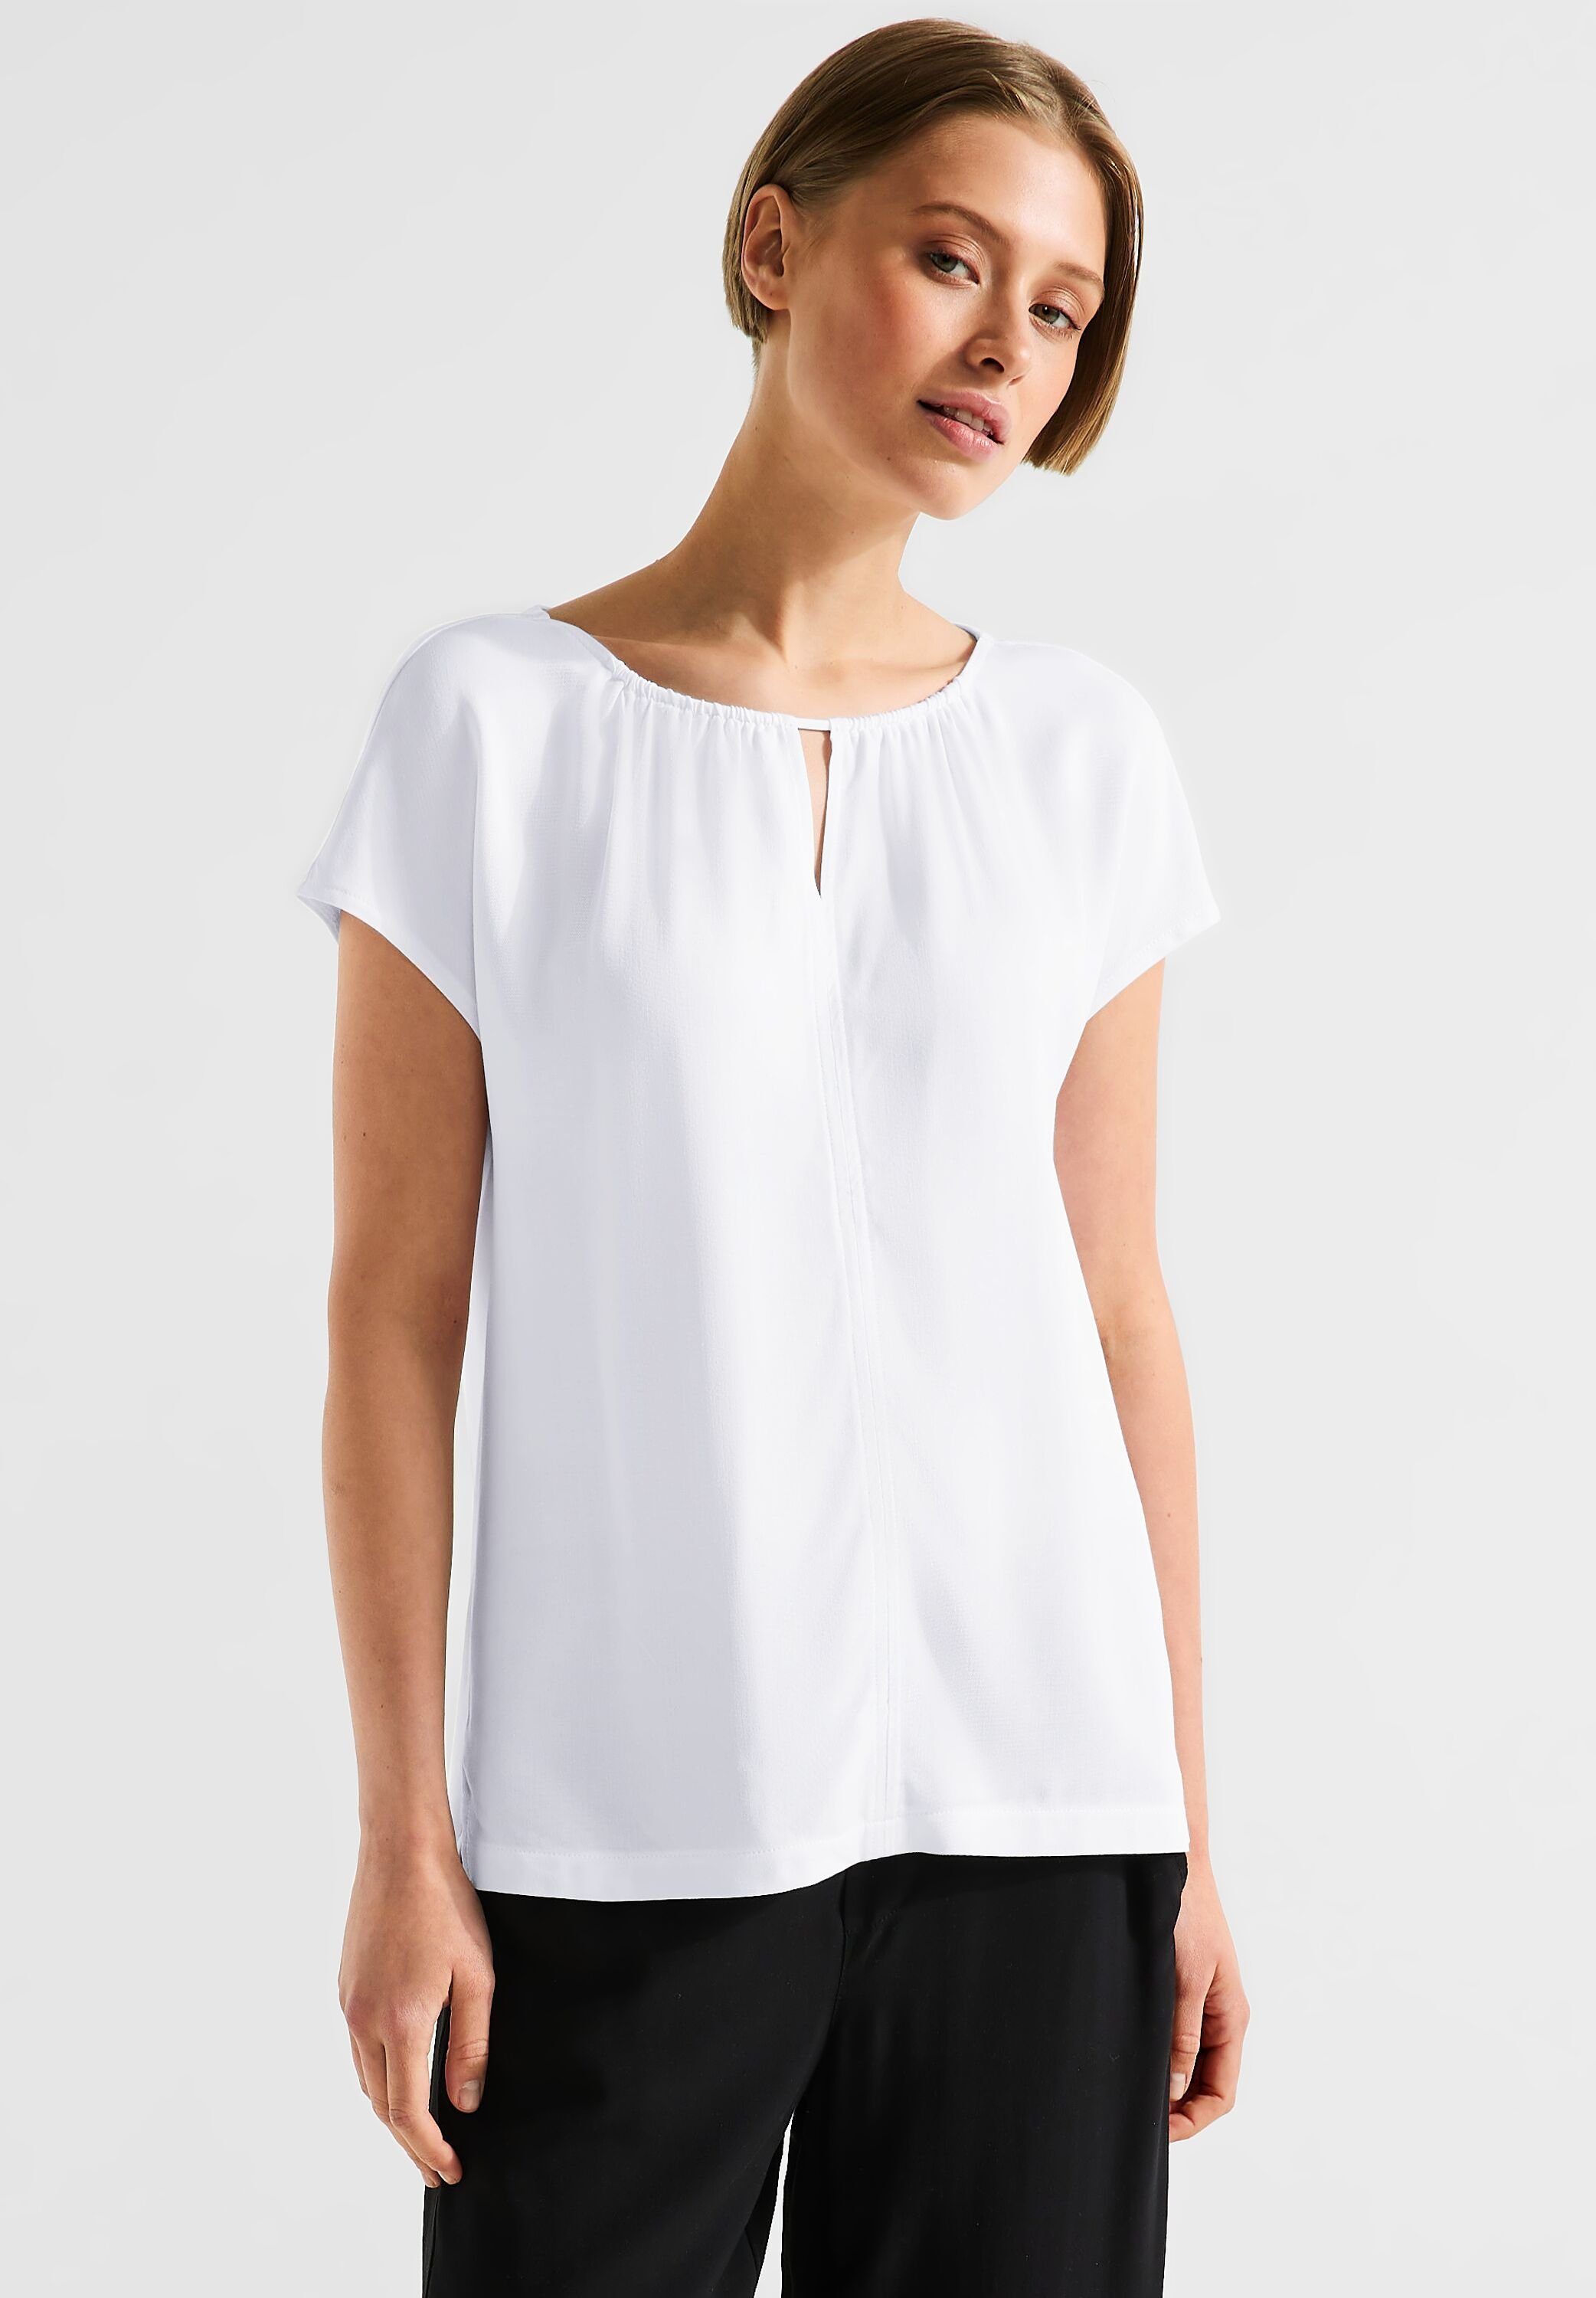 STREET ONE T-Shirt Street One Materialmixshirt mit Cut-Out in White (1-tlg) Cut-Out